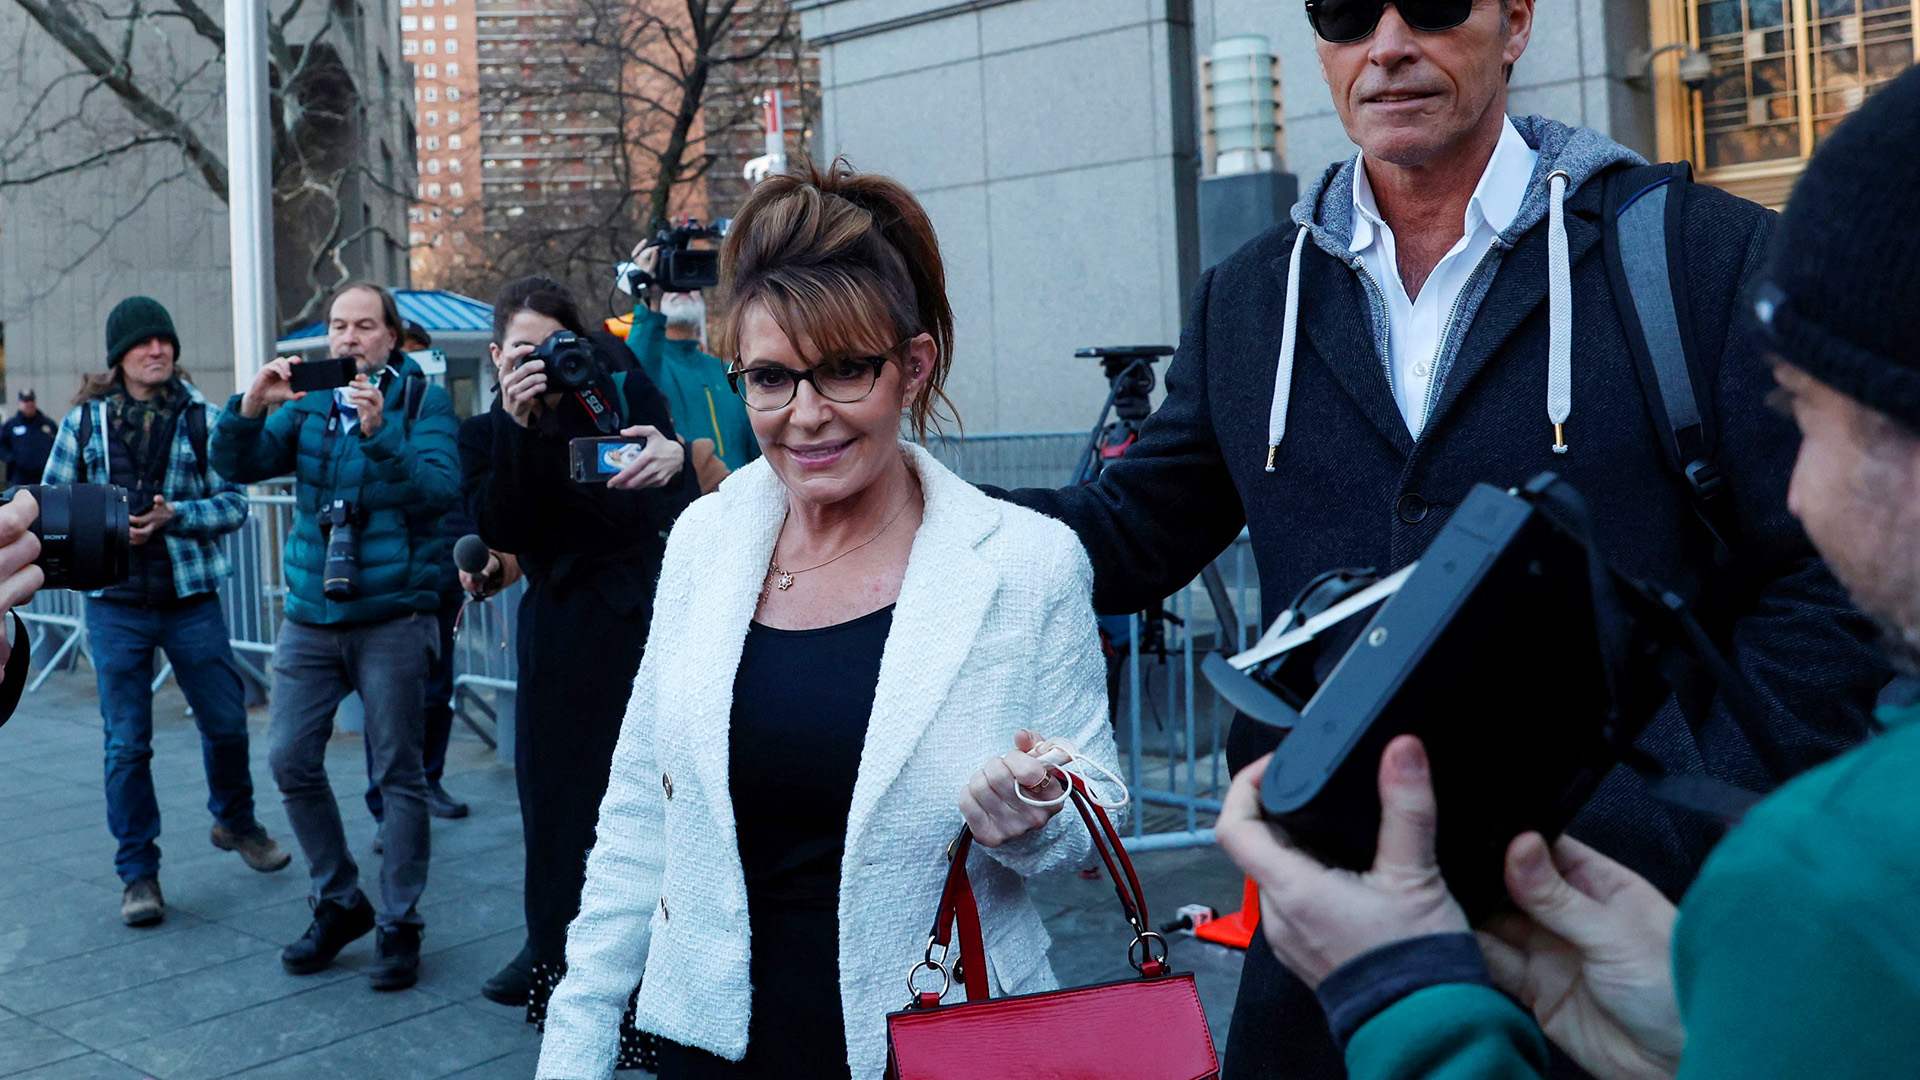 Sarah Palin is running for Congress. Many Alaskans are skeptical of her. (washingtonpost.com)